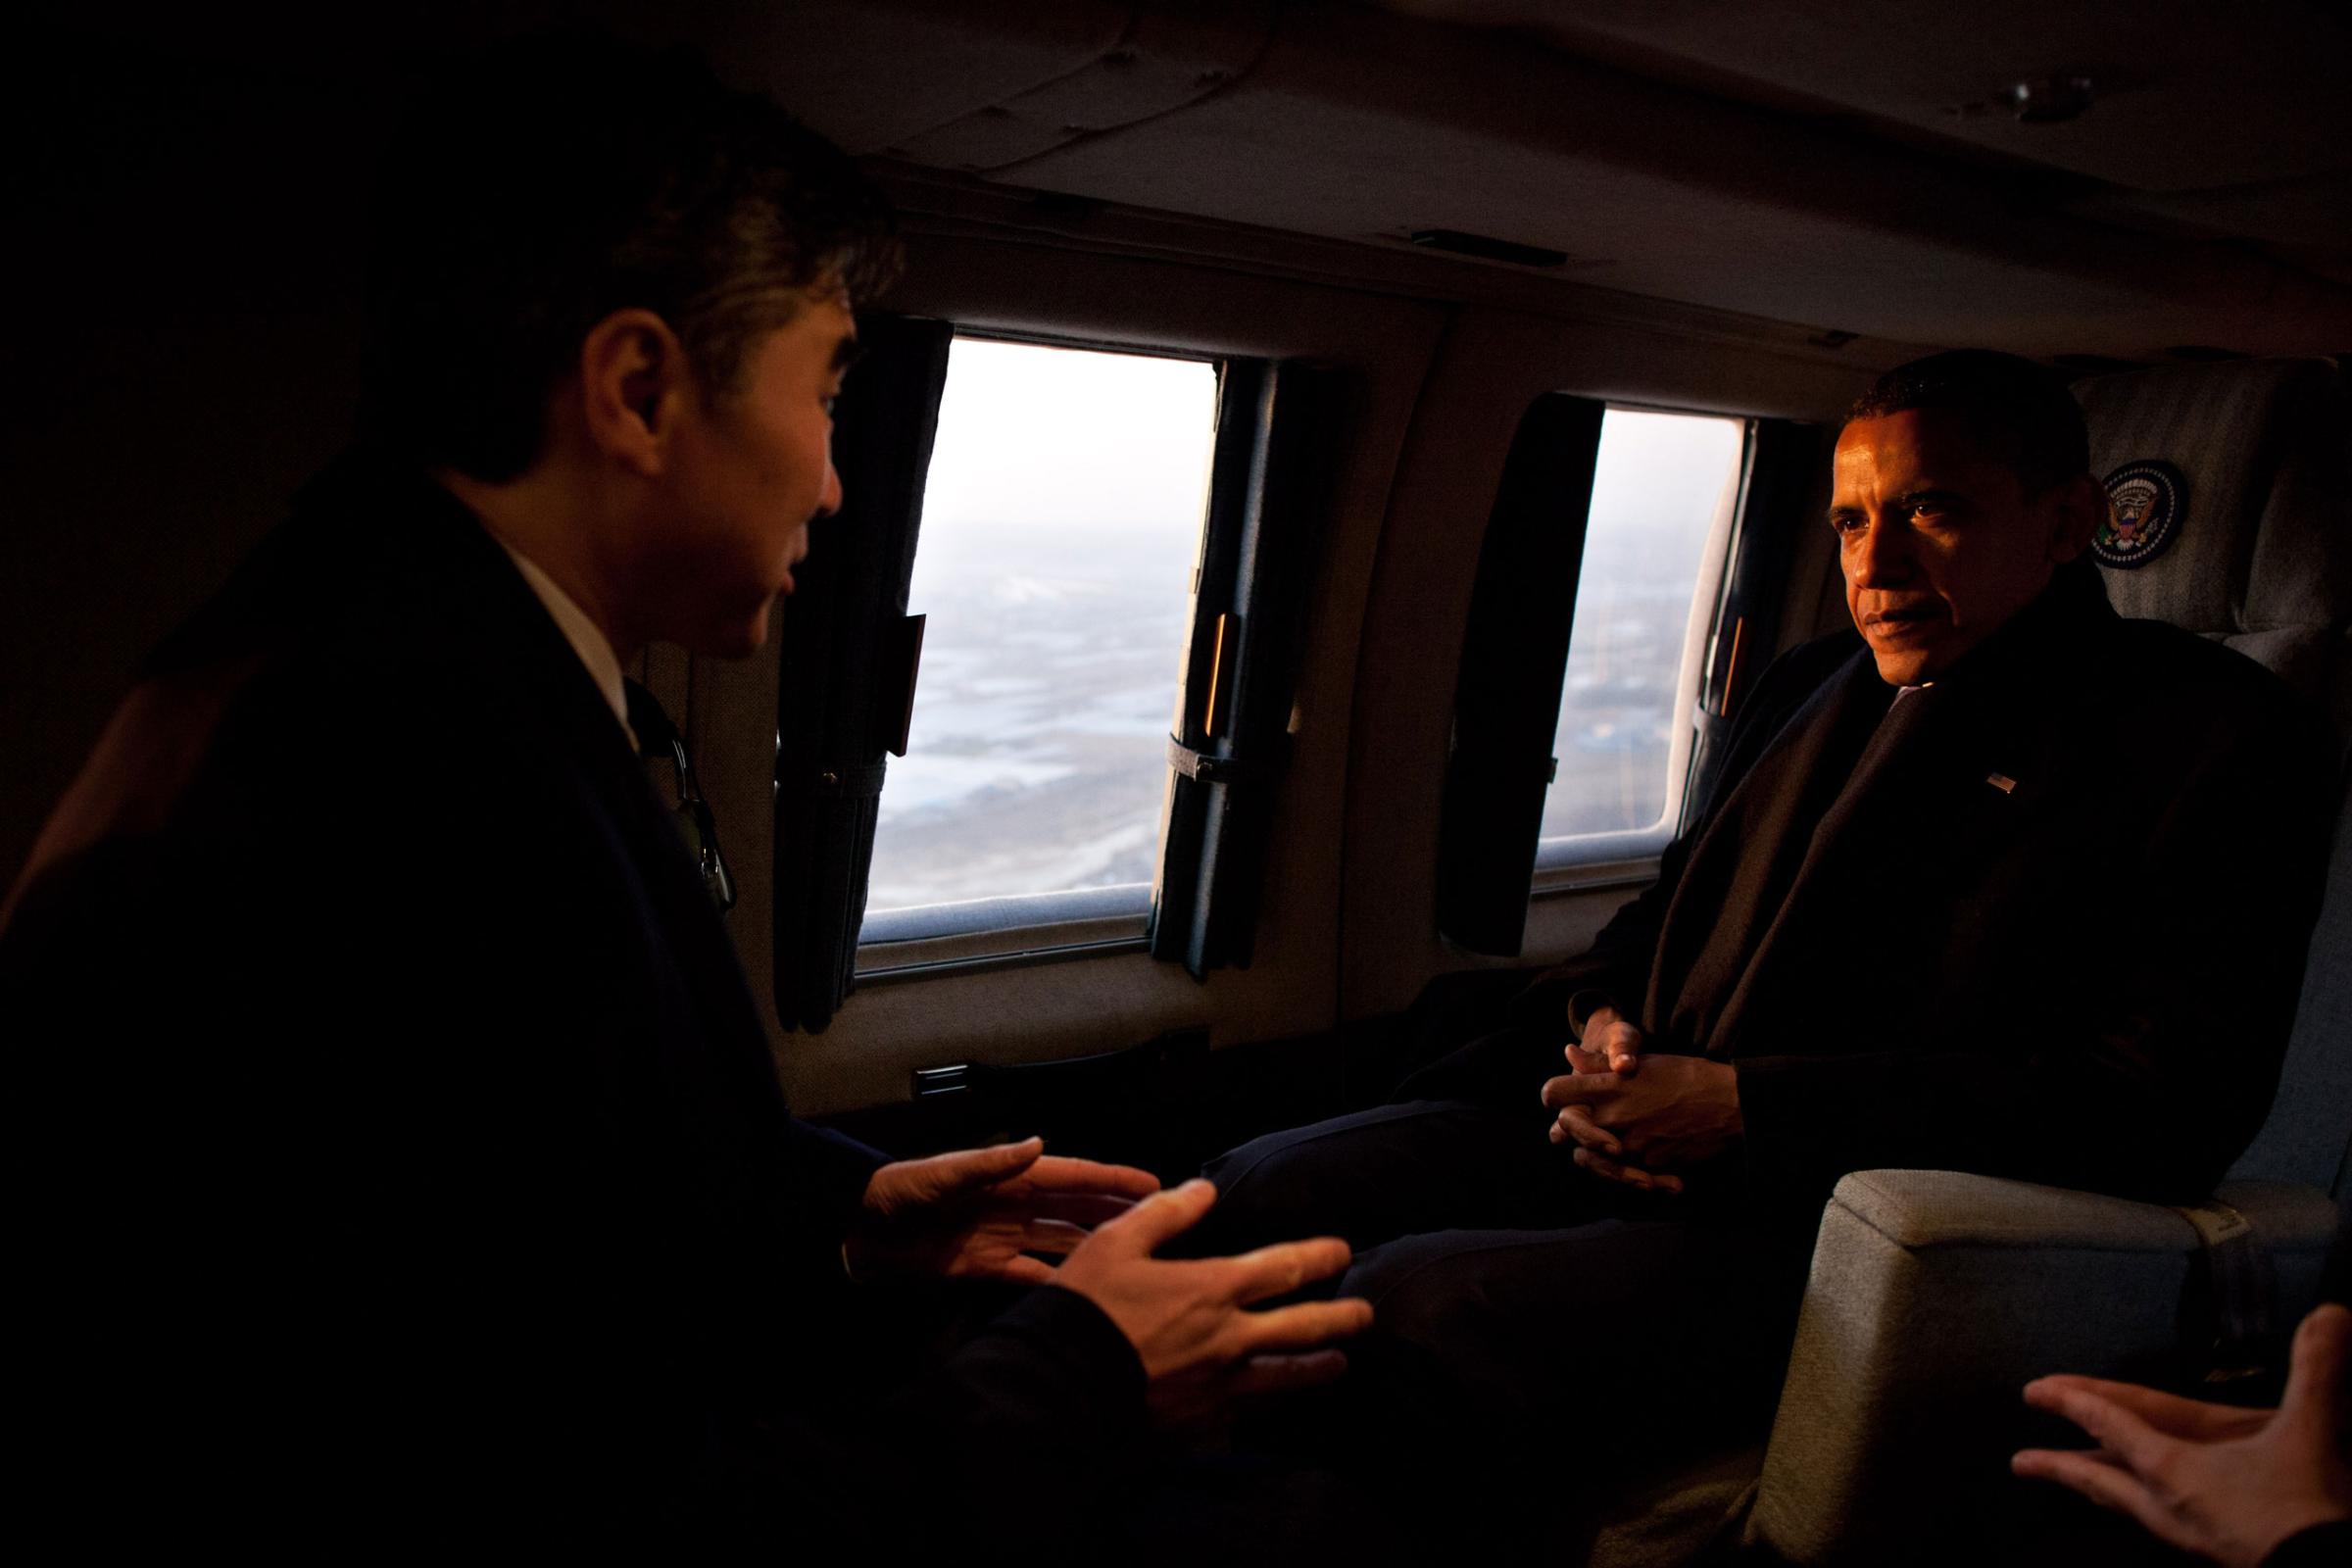 President Barack Obama talks with Sung Kim, U.S. Ambassador to Republic of Korea, aboard Marine One during an early morning flight from Osan Air Base to the landing zone at U.S. Army Garrison Yongsan in Seoul, Republic of Korea, March 25, 2012.